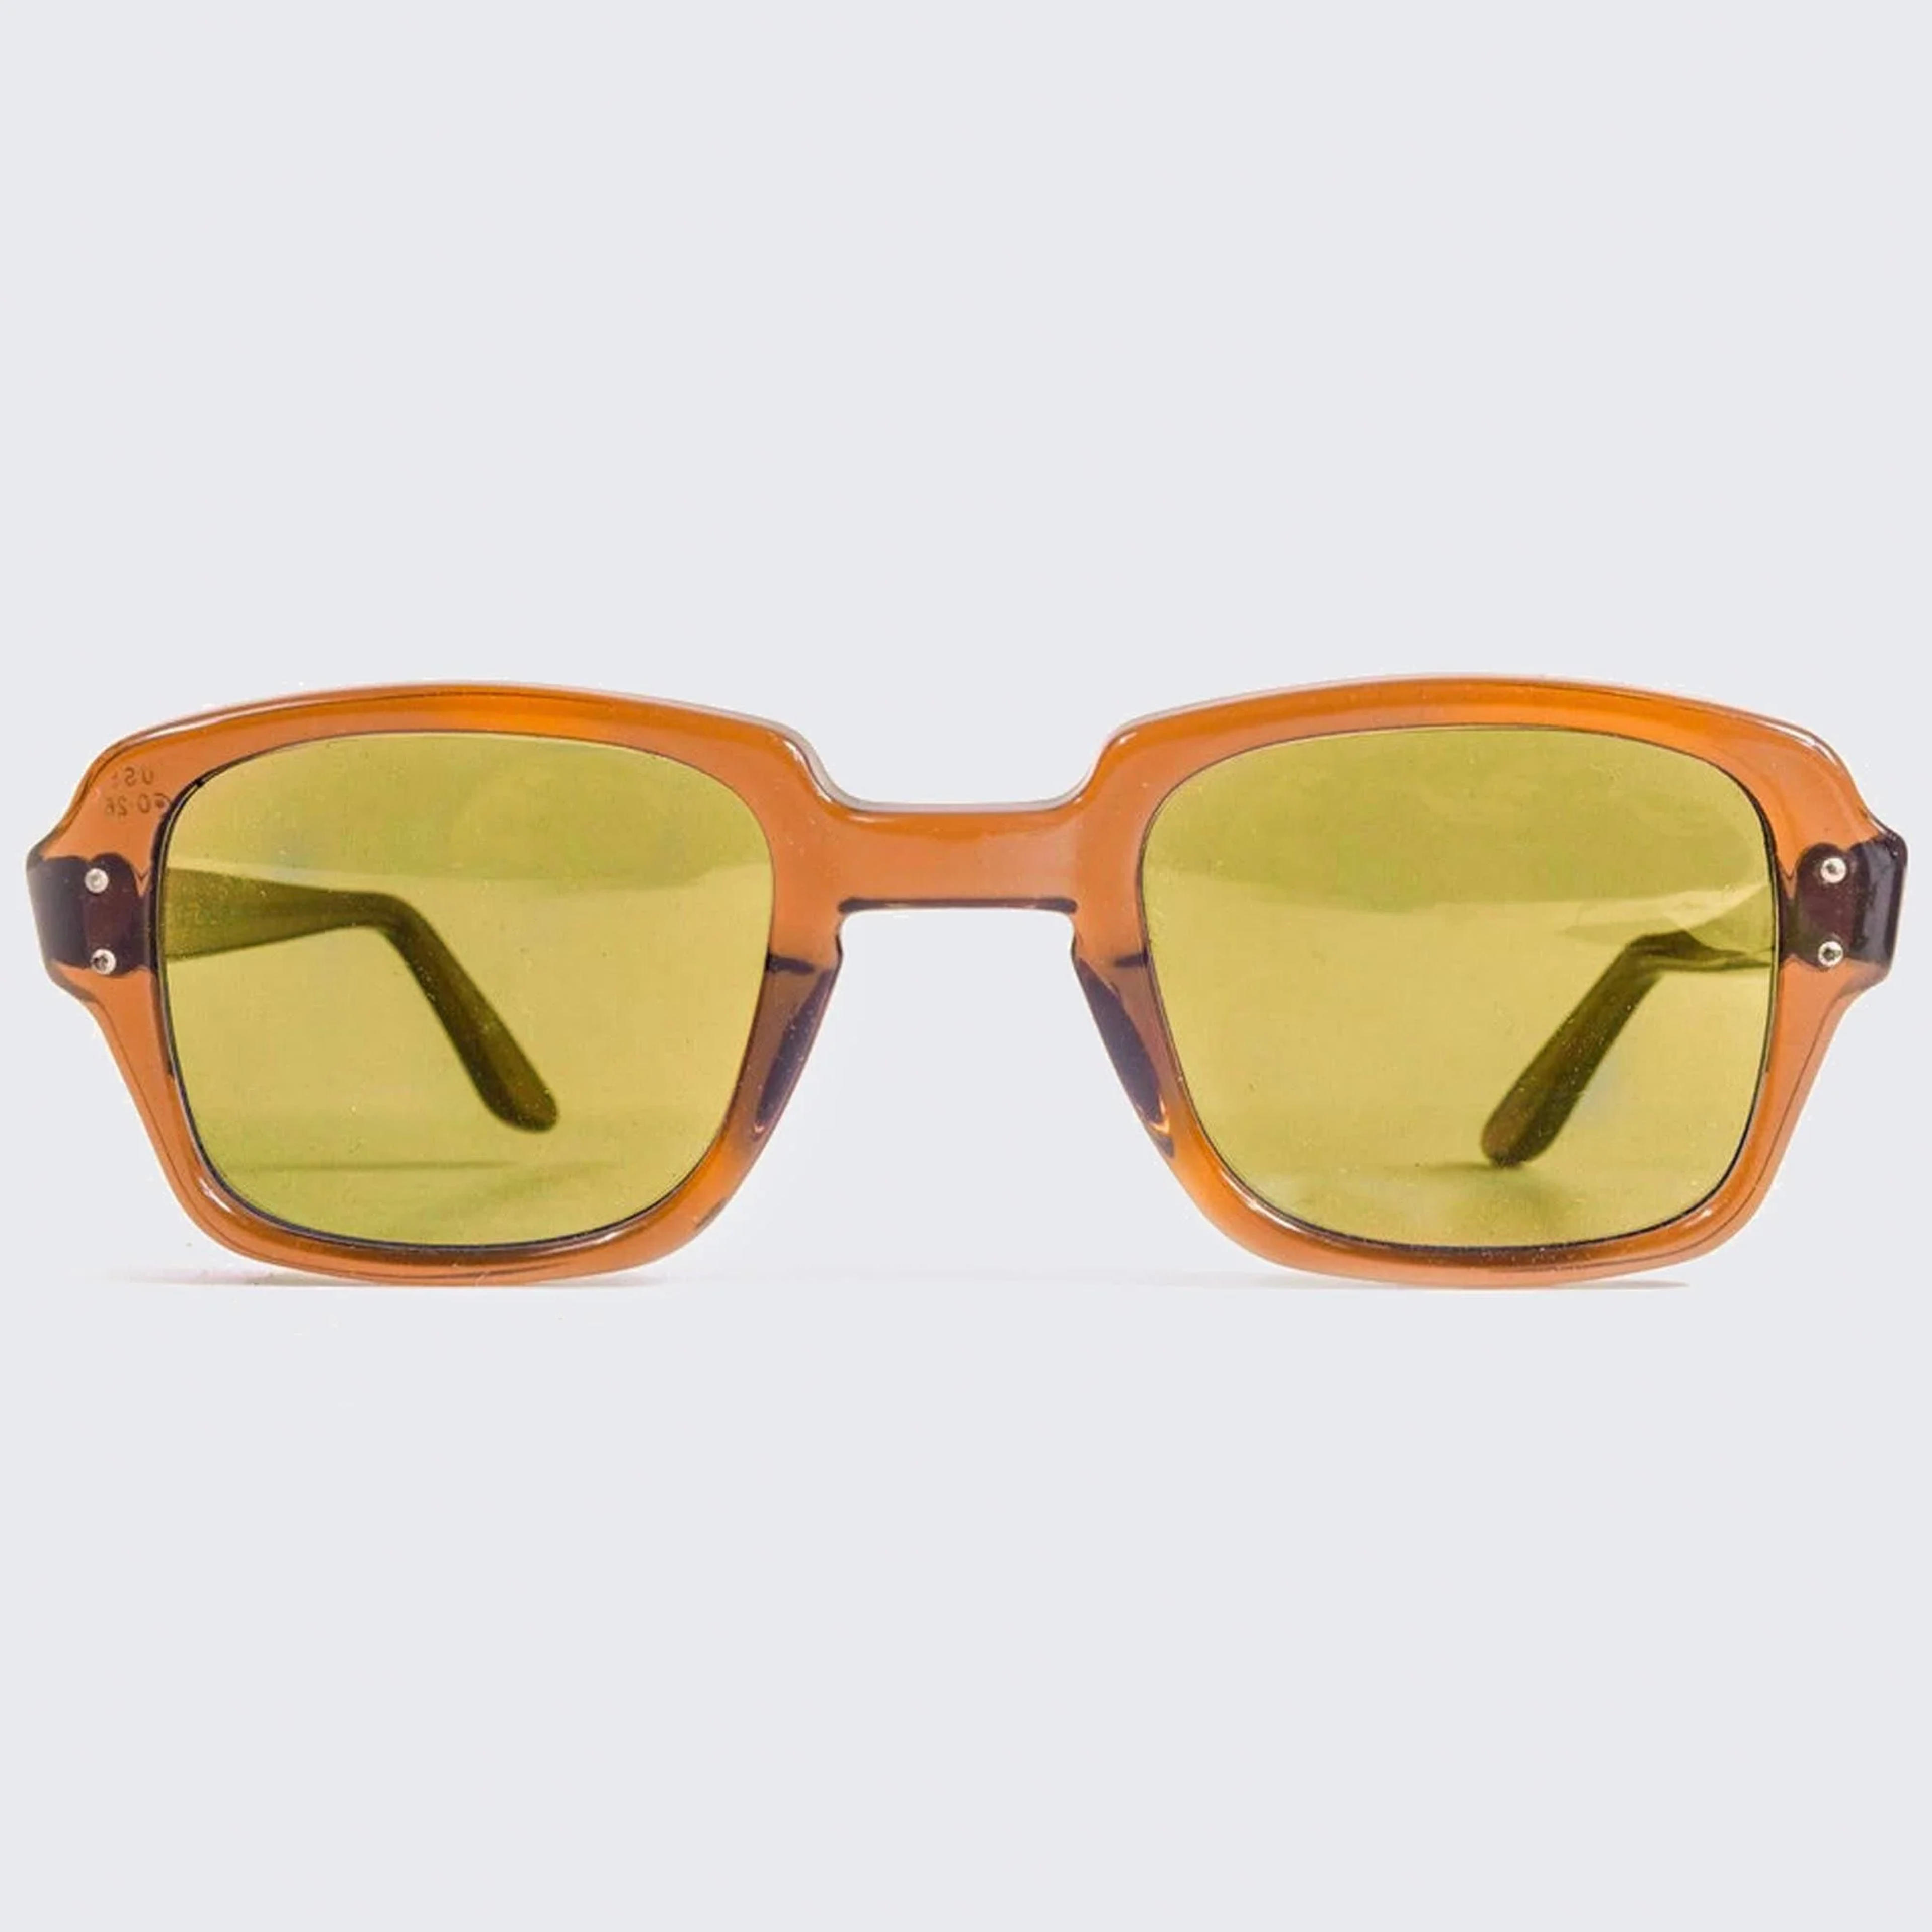 US ARMY SUNGLASSES - YELLOW | Universal Surplus best vintage military army store !